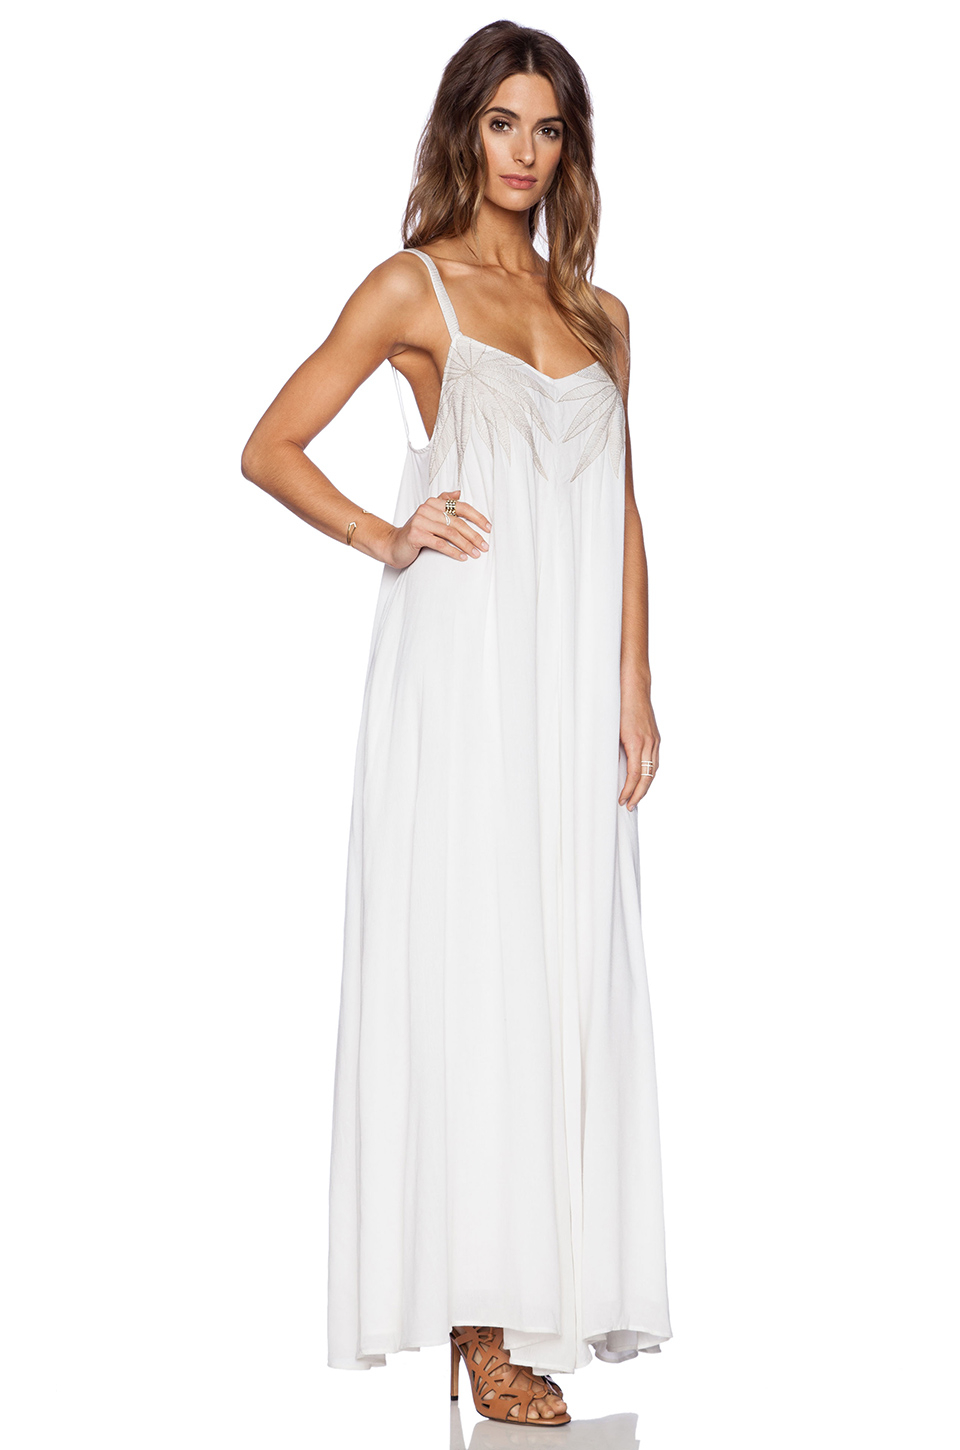 Lyst - Mara Hoffman Embroidered Maxi Dress in White